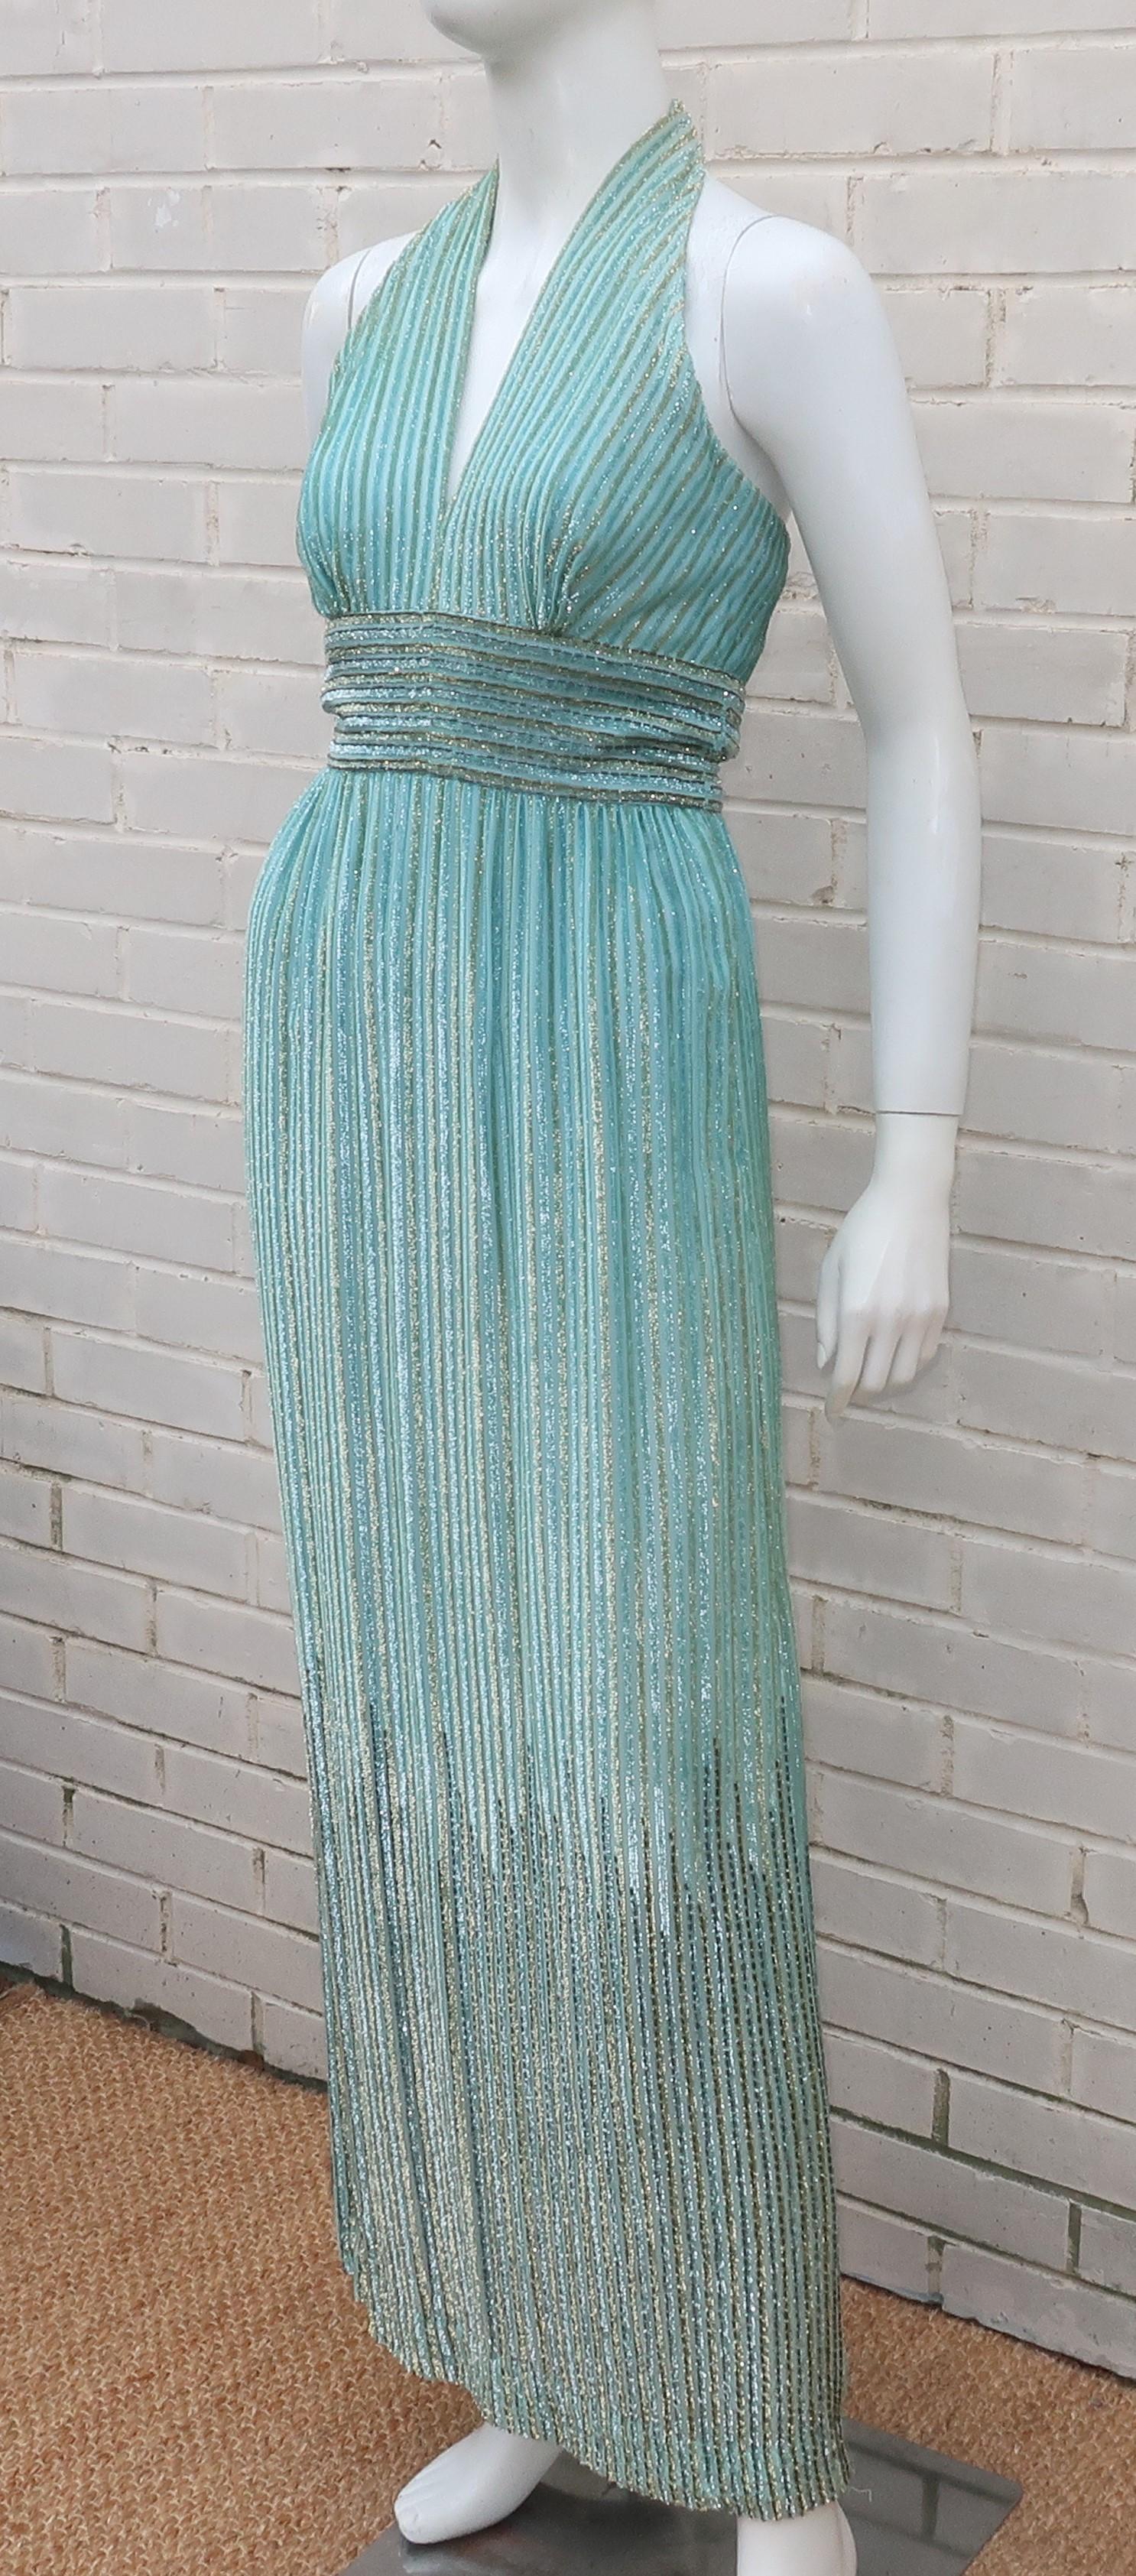 Alfred Bosand Two Piece Beaded Mint Green Halter Dress & Jacket, 1970's For Sale 5